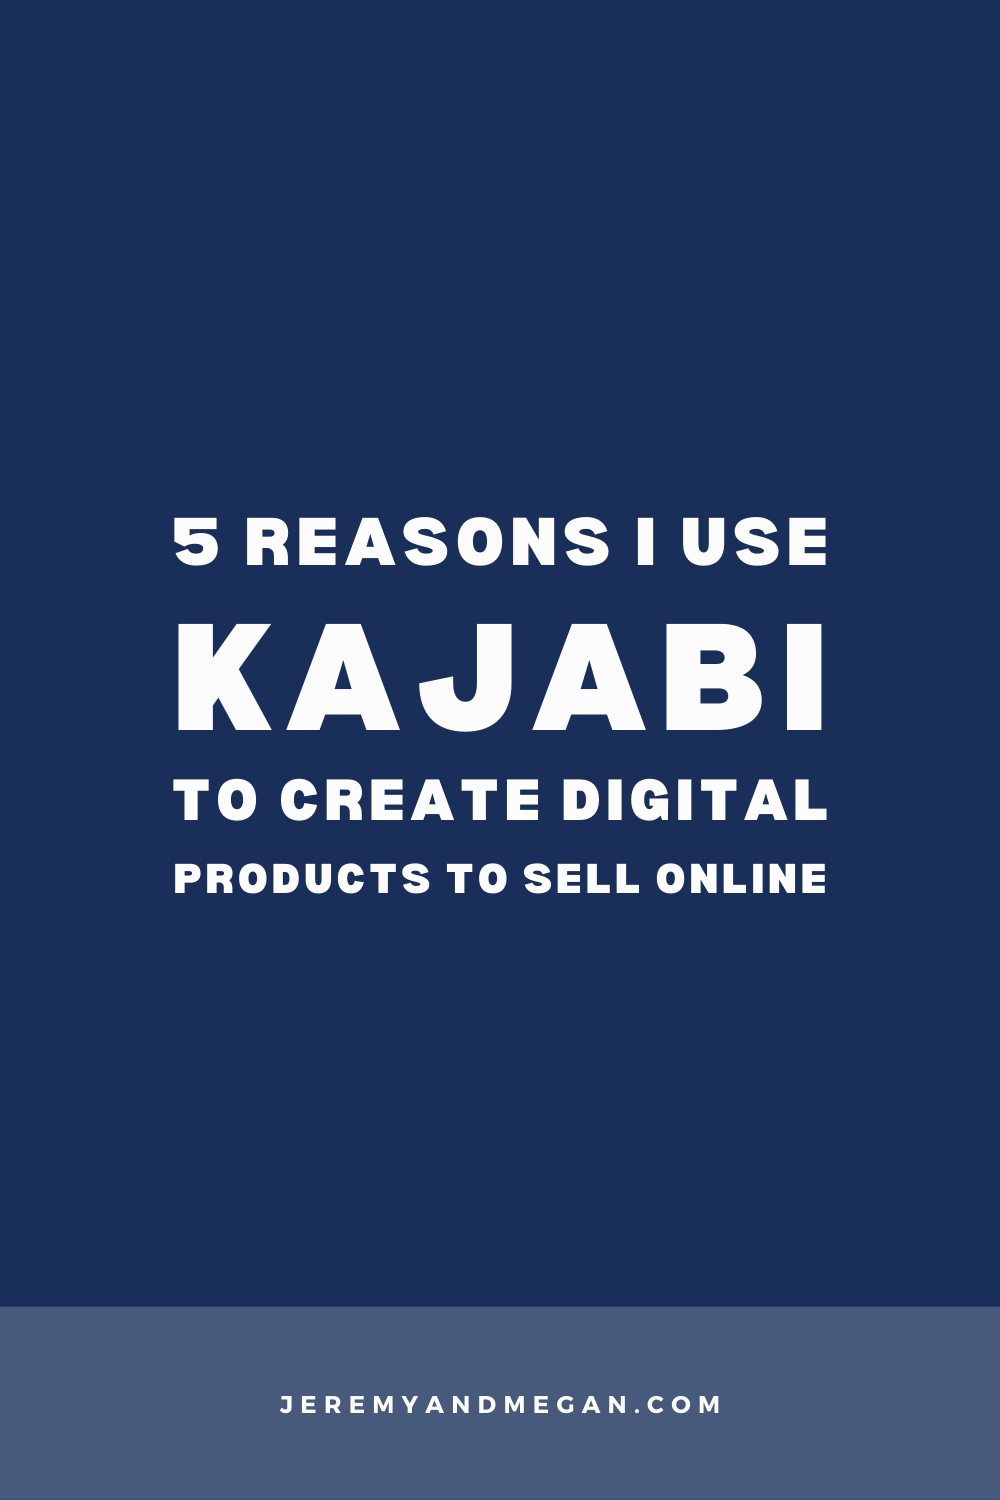 5 Reasons I use Kajabi to create digital products to sell online